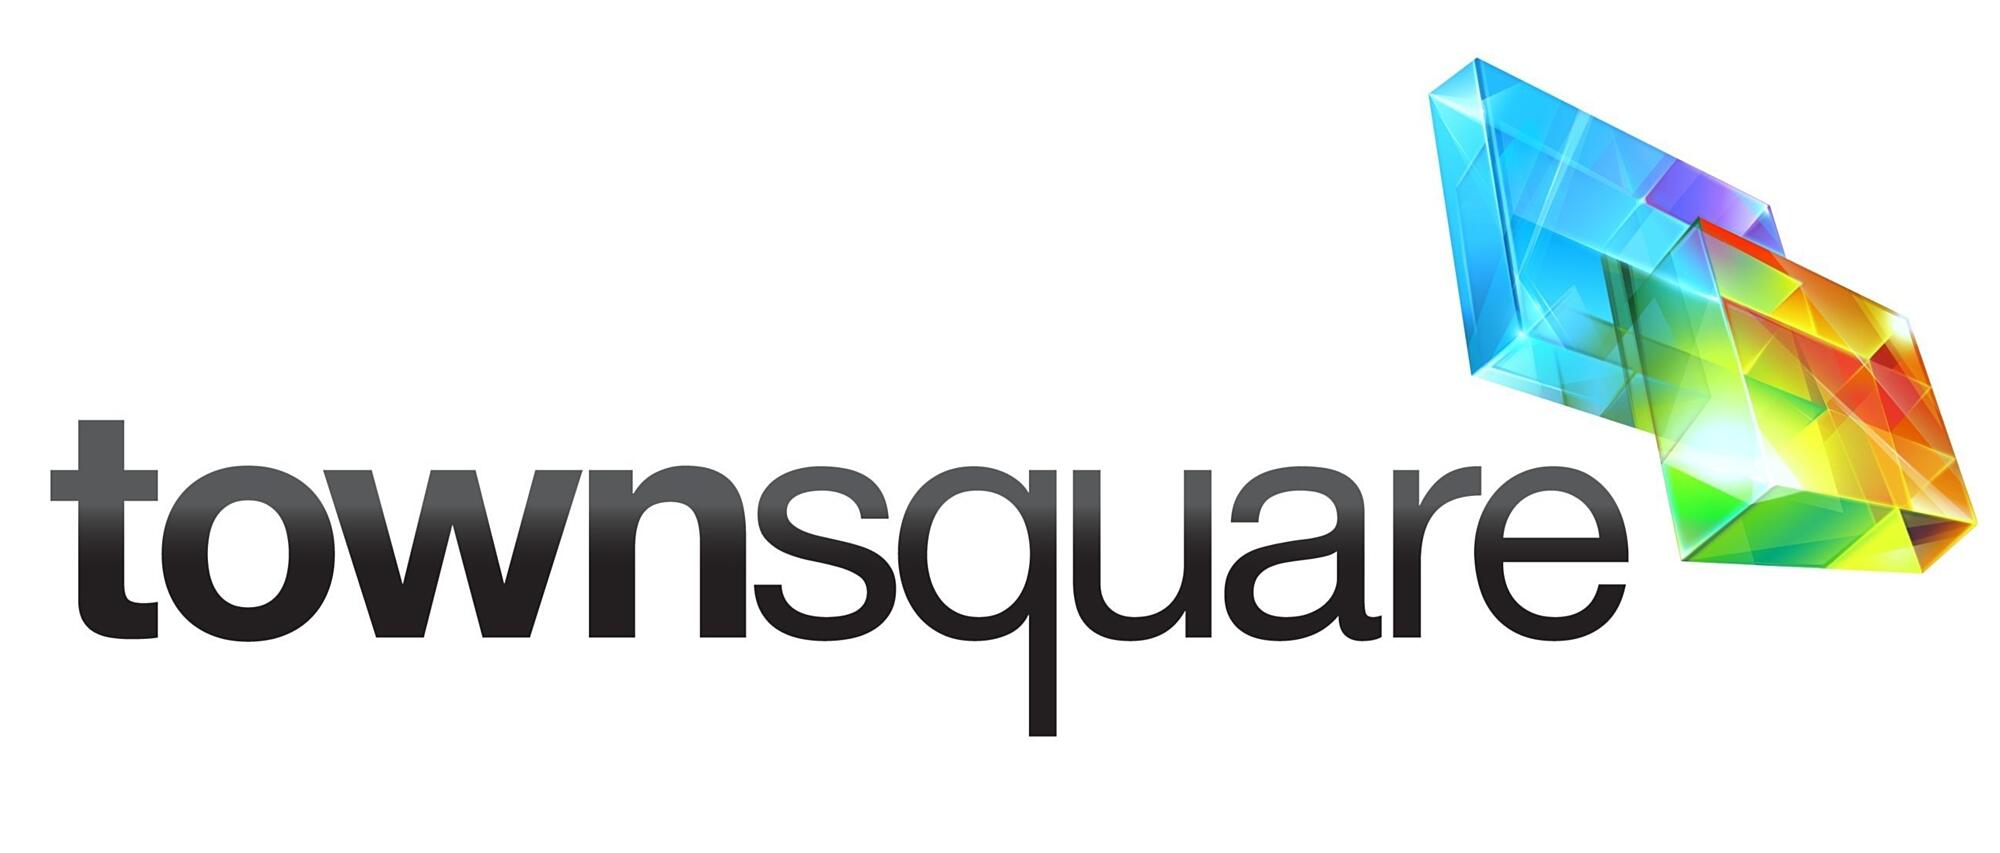  Townsquare Media Repurchases 1.5 Million Shares